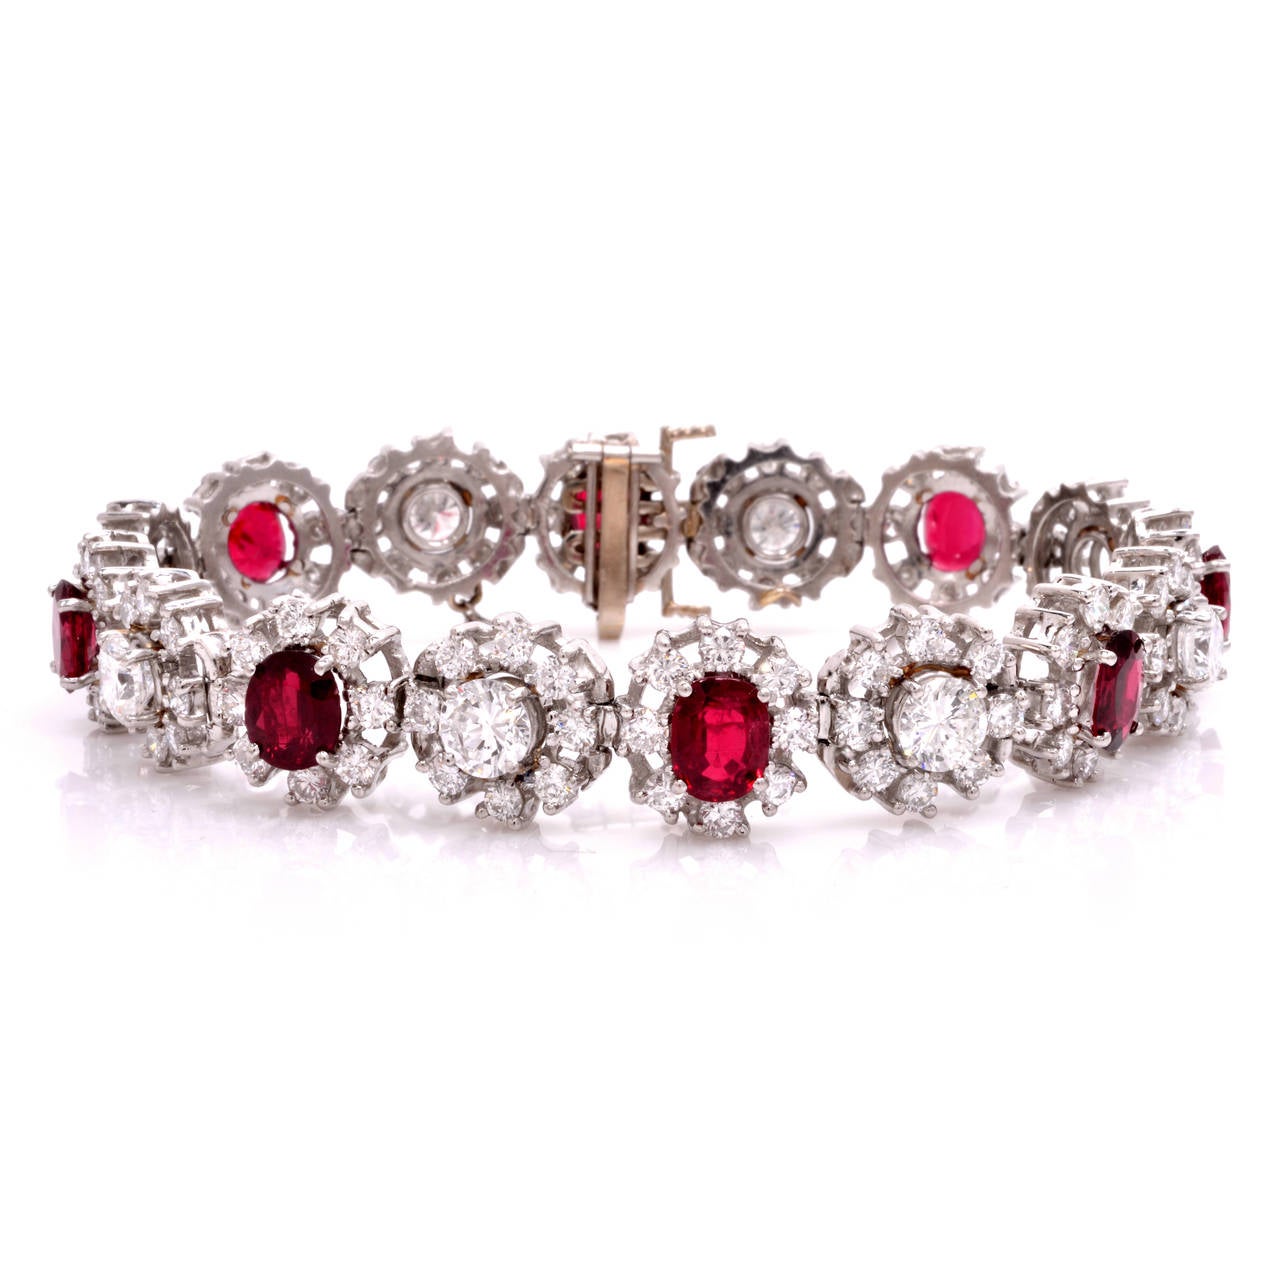 This sparkling and incredibly incandescent sophisticated diamond ruby bracelet radiates glamour with elegance. Finely crafted in solid 18K white gold, it is illuminated with a glittering combination of fine diamonds and genuine rubies in a floral